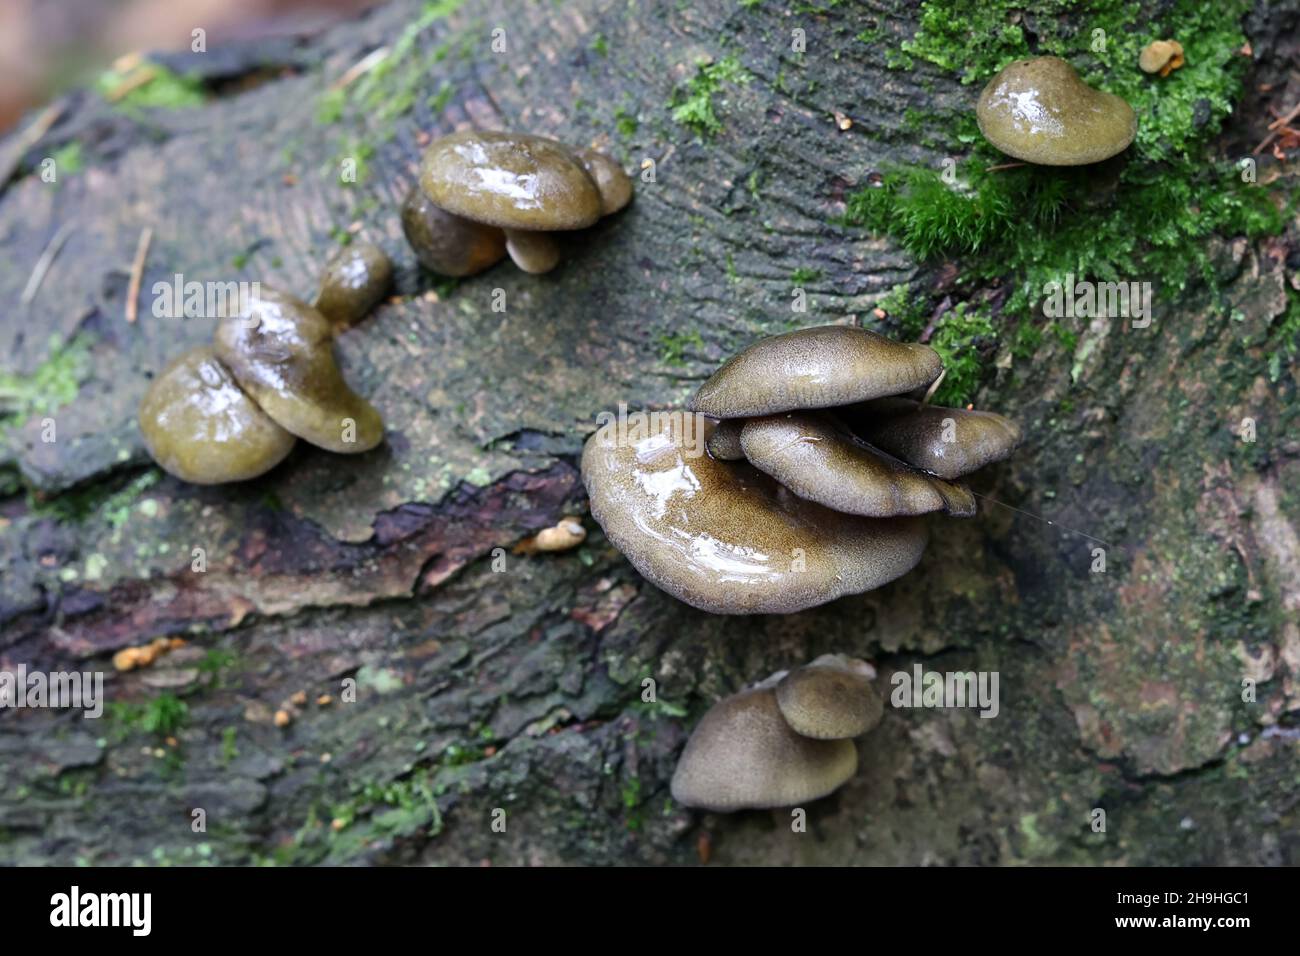 Sarcomyxa serotina, commonly known as the late oyster or olive oysterling, wild mushroom from Finland Stock Photo